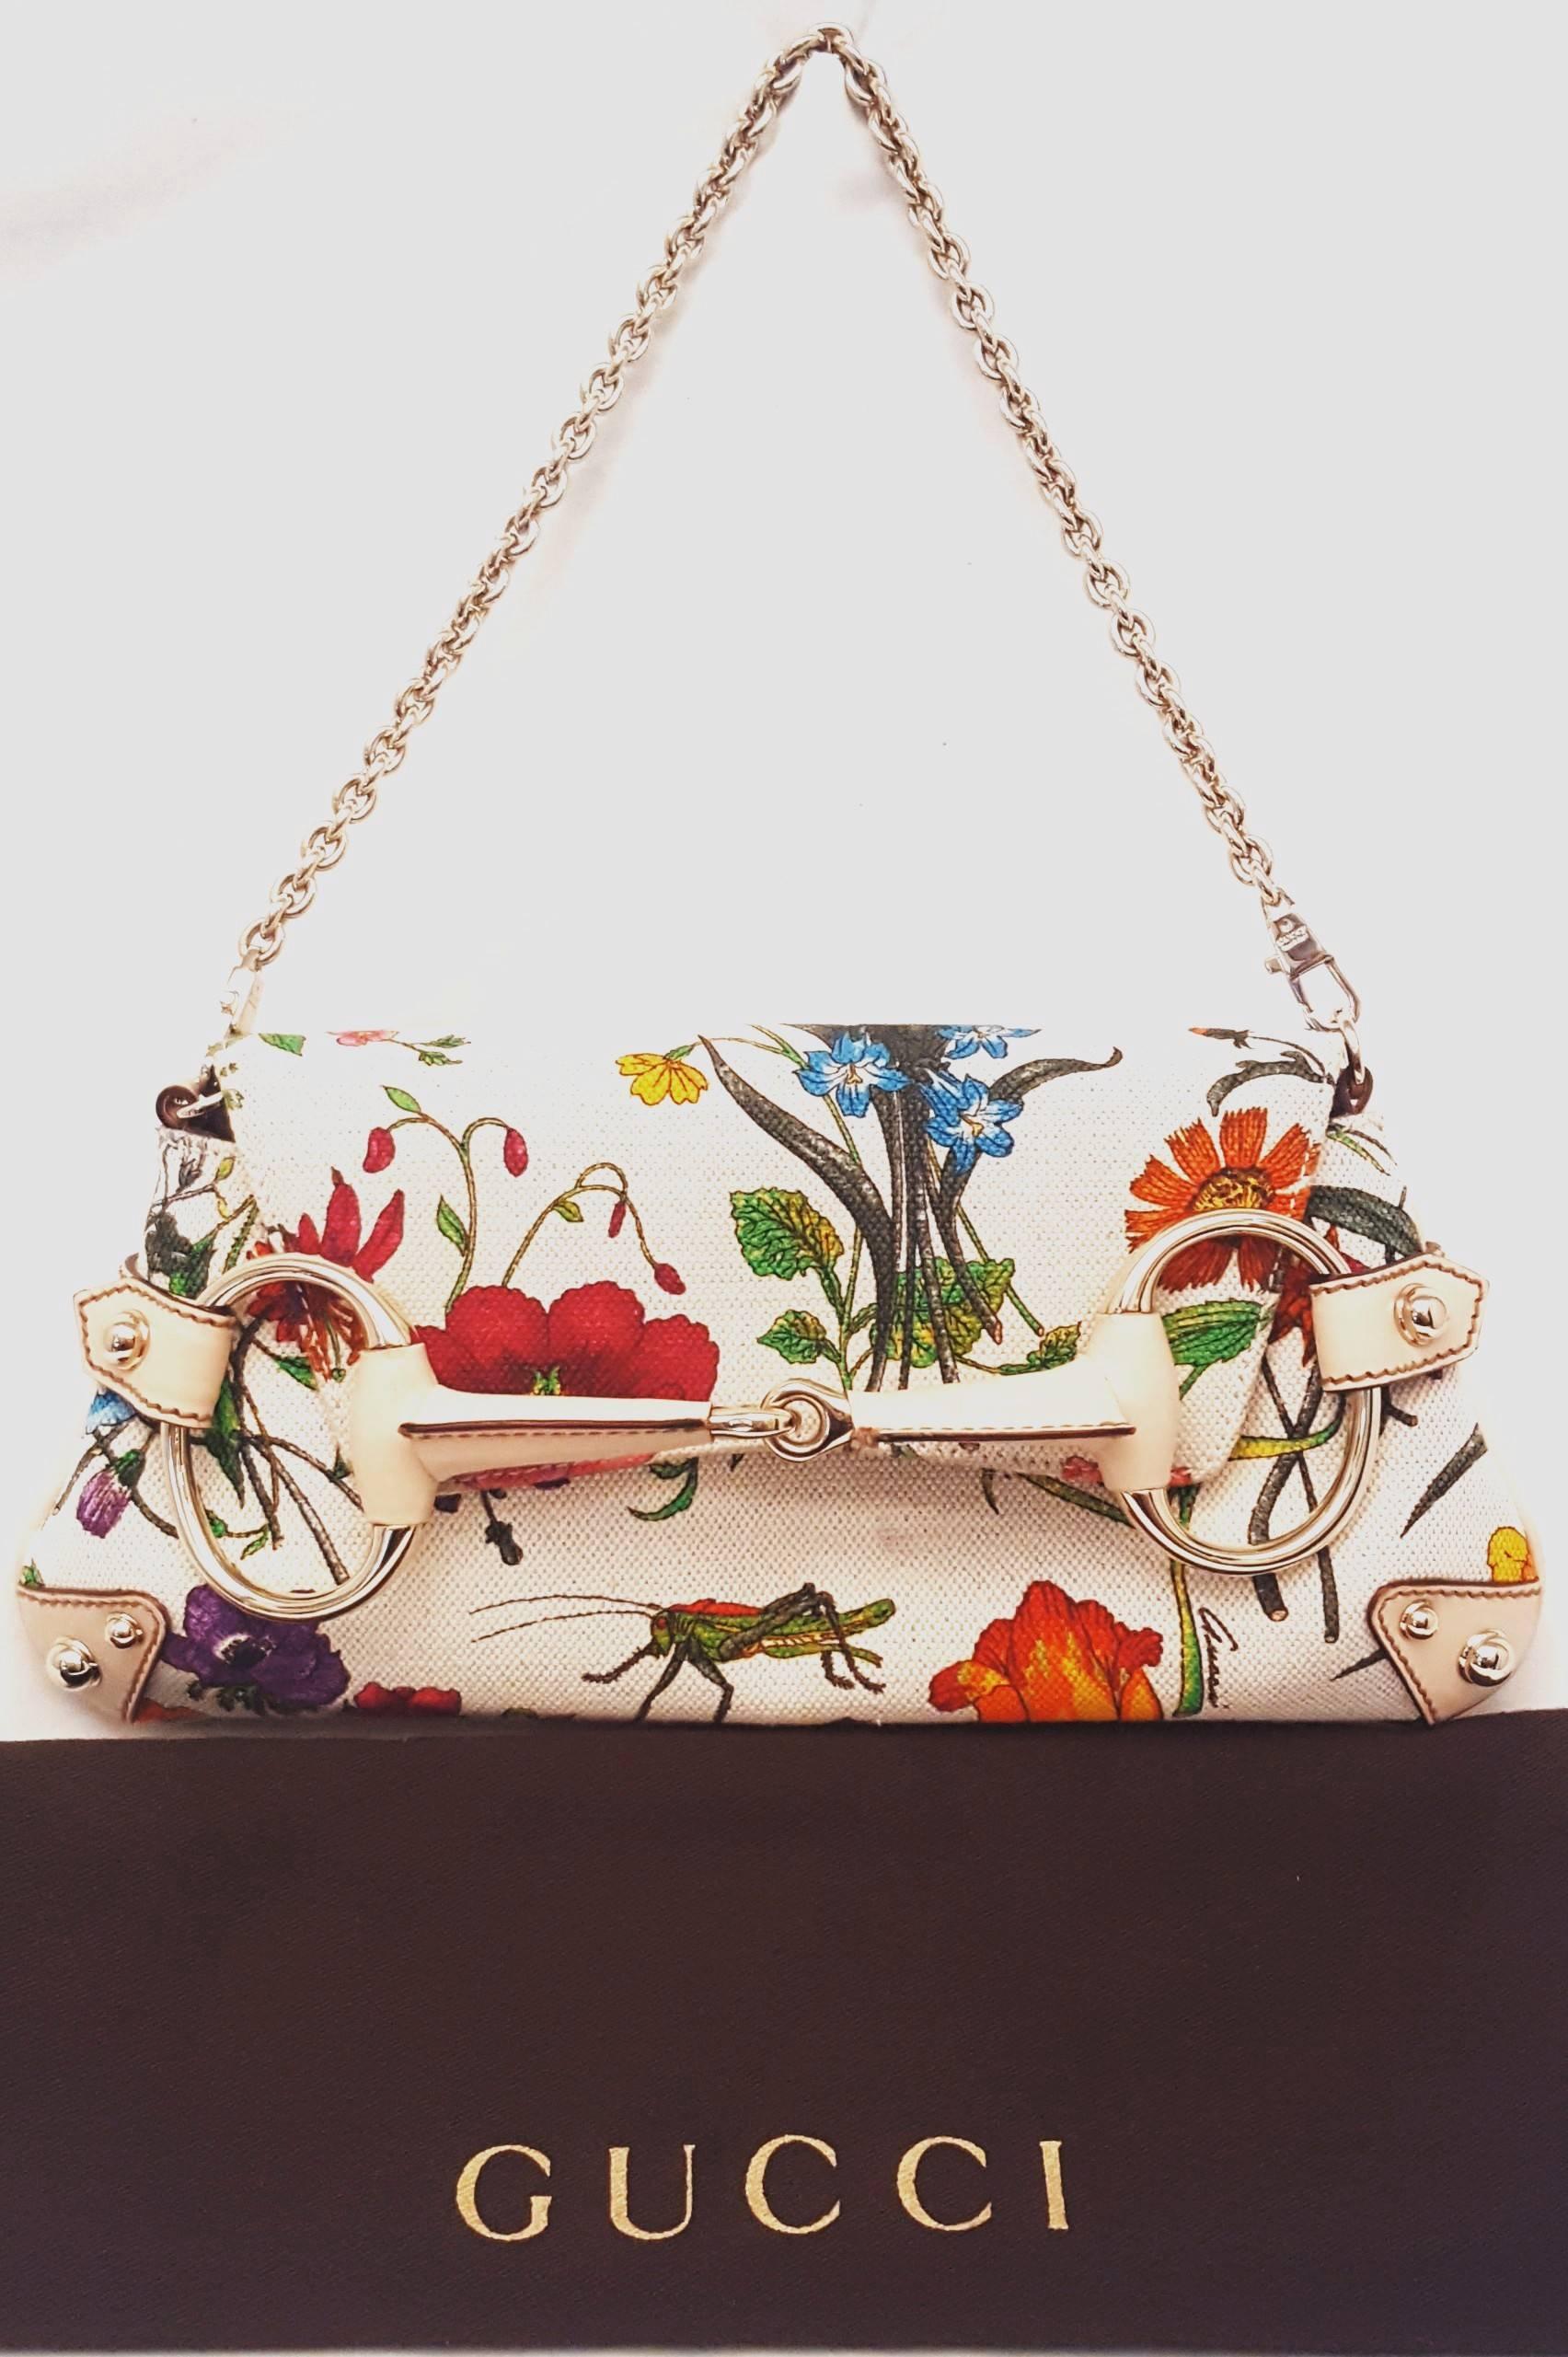 Gucci Flora printed canvas bag with horse-bit decoration on flap is a luxurious and elegant piece.  The outside leather is a beautiful pinkish beige color and the inside is lined in beige leather on the flap.  The interior is of beige canvas on the